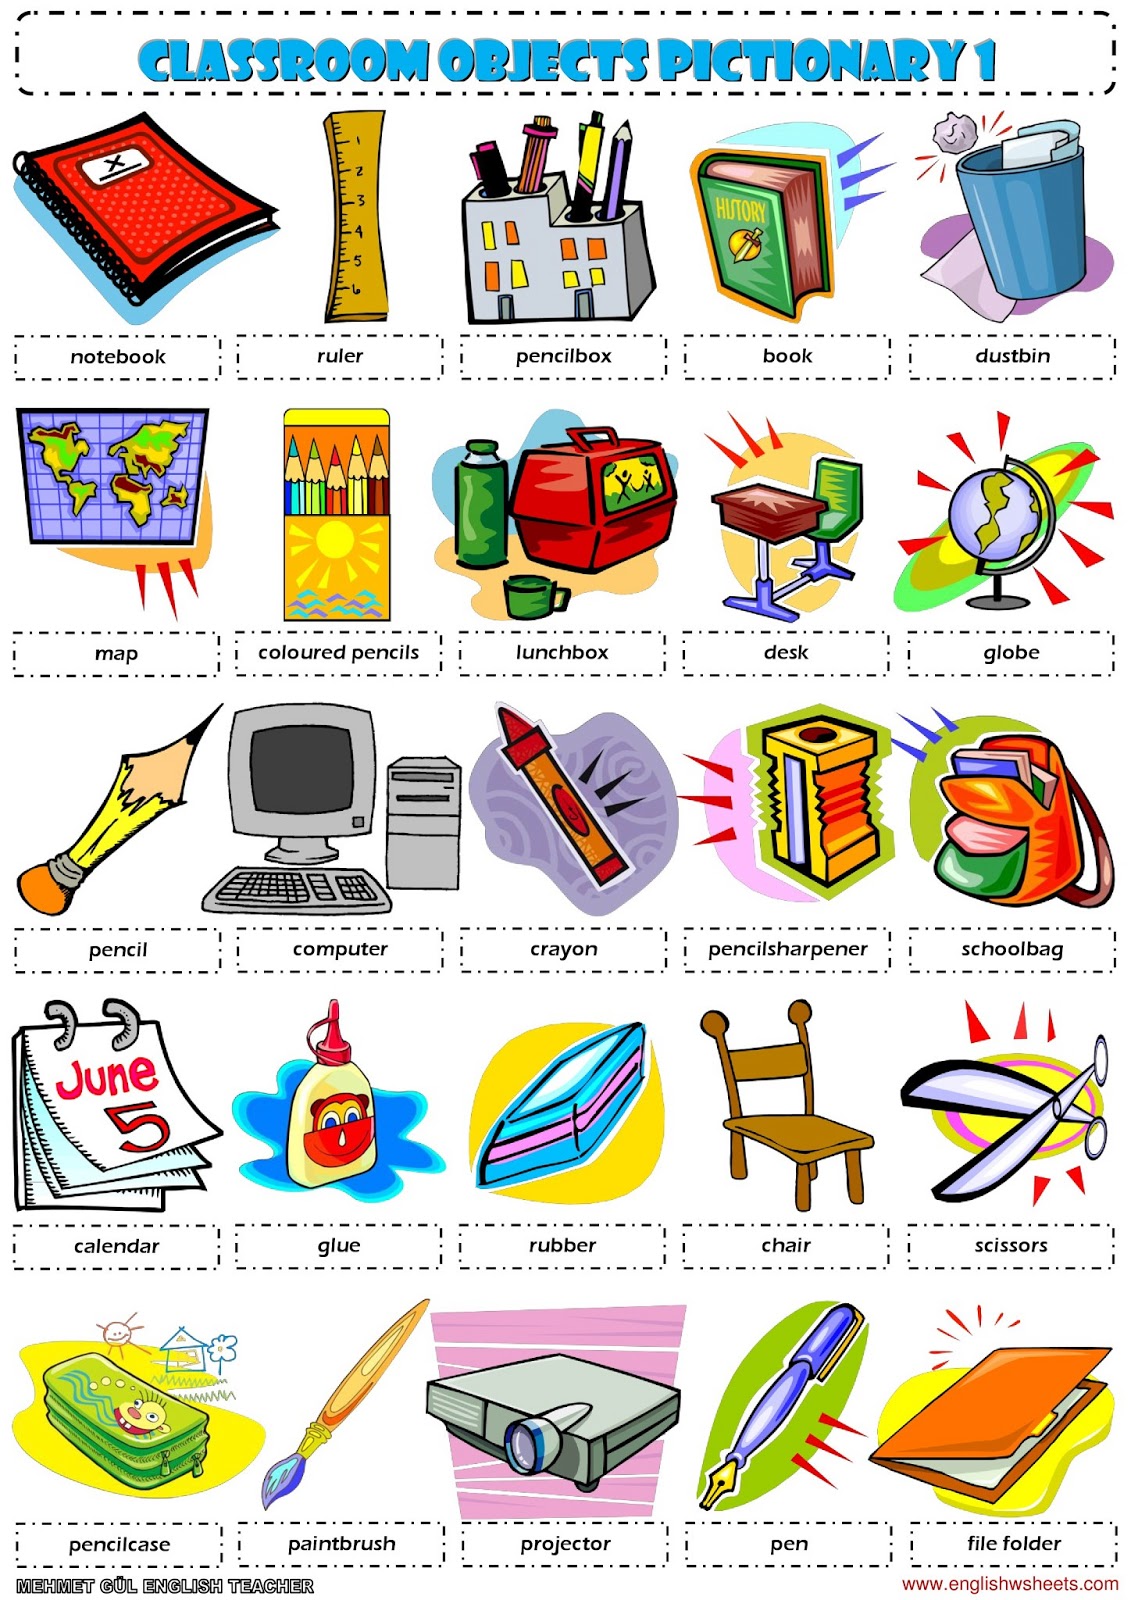 clipart of objects in a classroom - photo #22